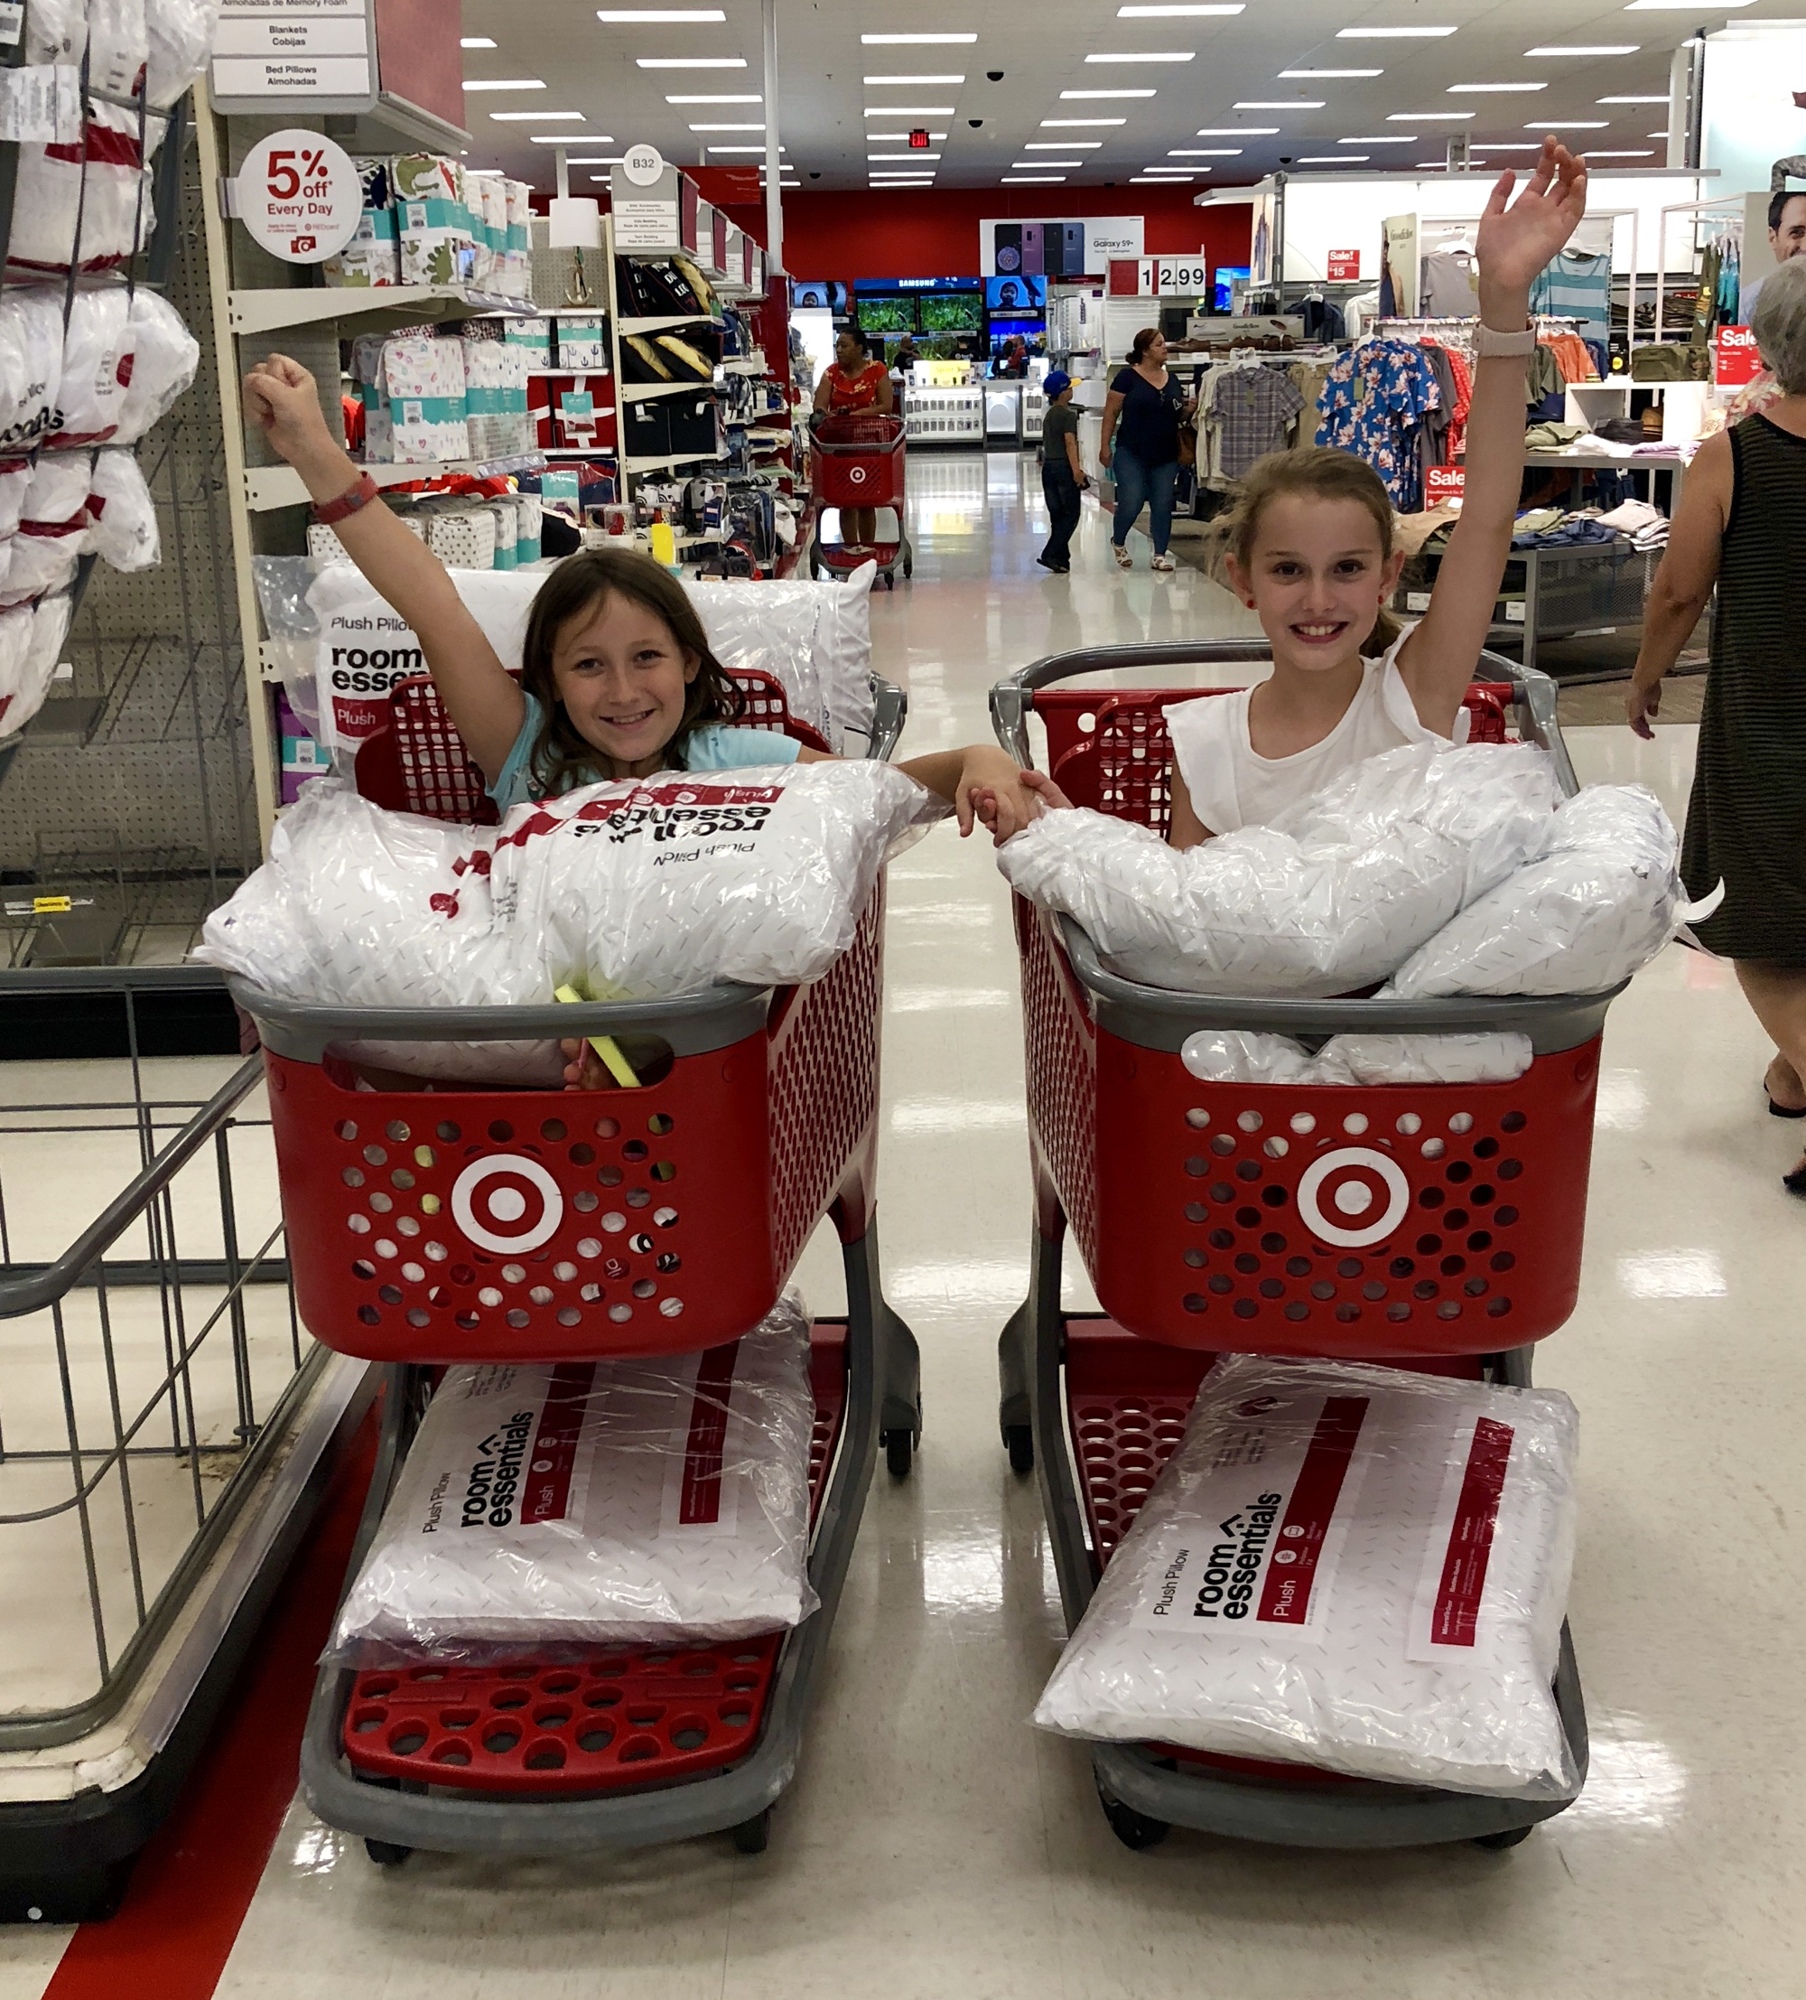 CC Charities founders Carmella Duell, left, and Claire O’Malley purchased and donated pillows to St. Luke’s United Methodist Church, which shelters homeless families from Family Promise of Greater Orlando four times a year.